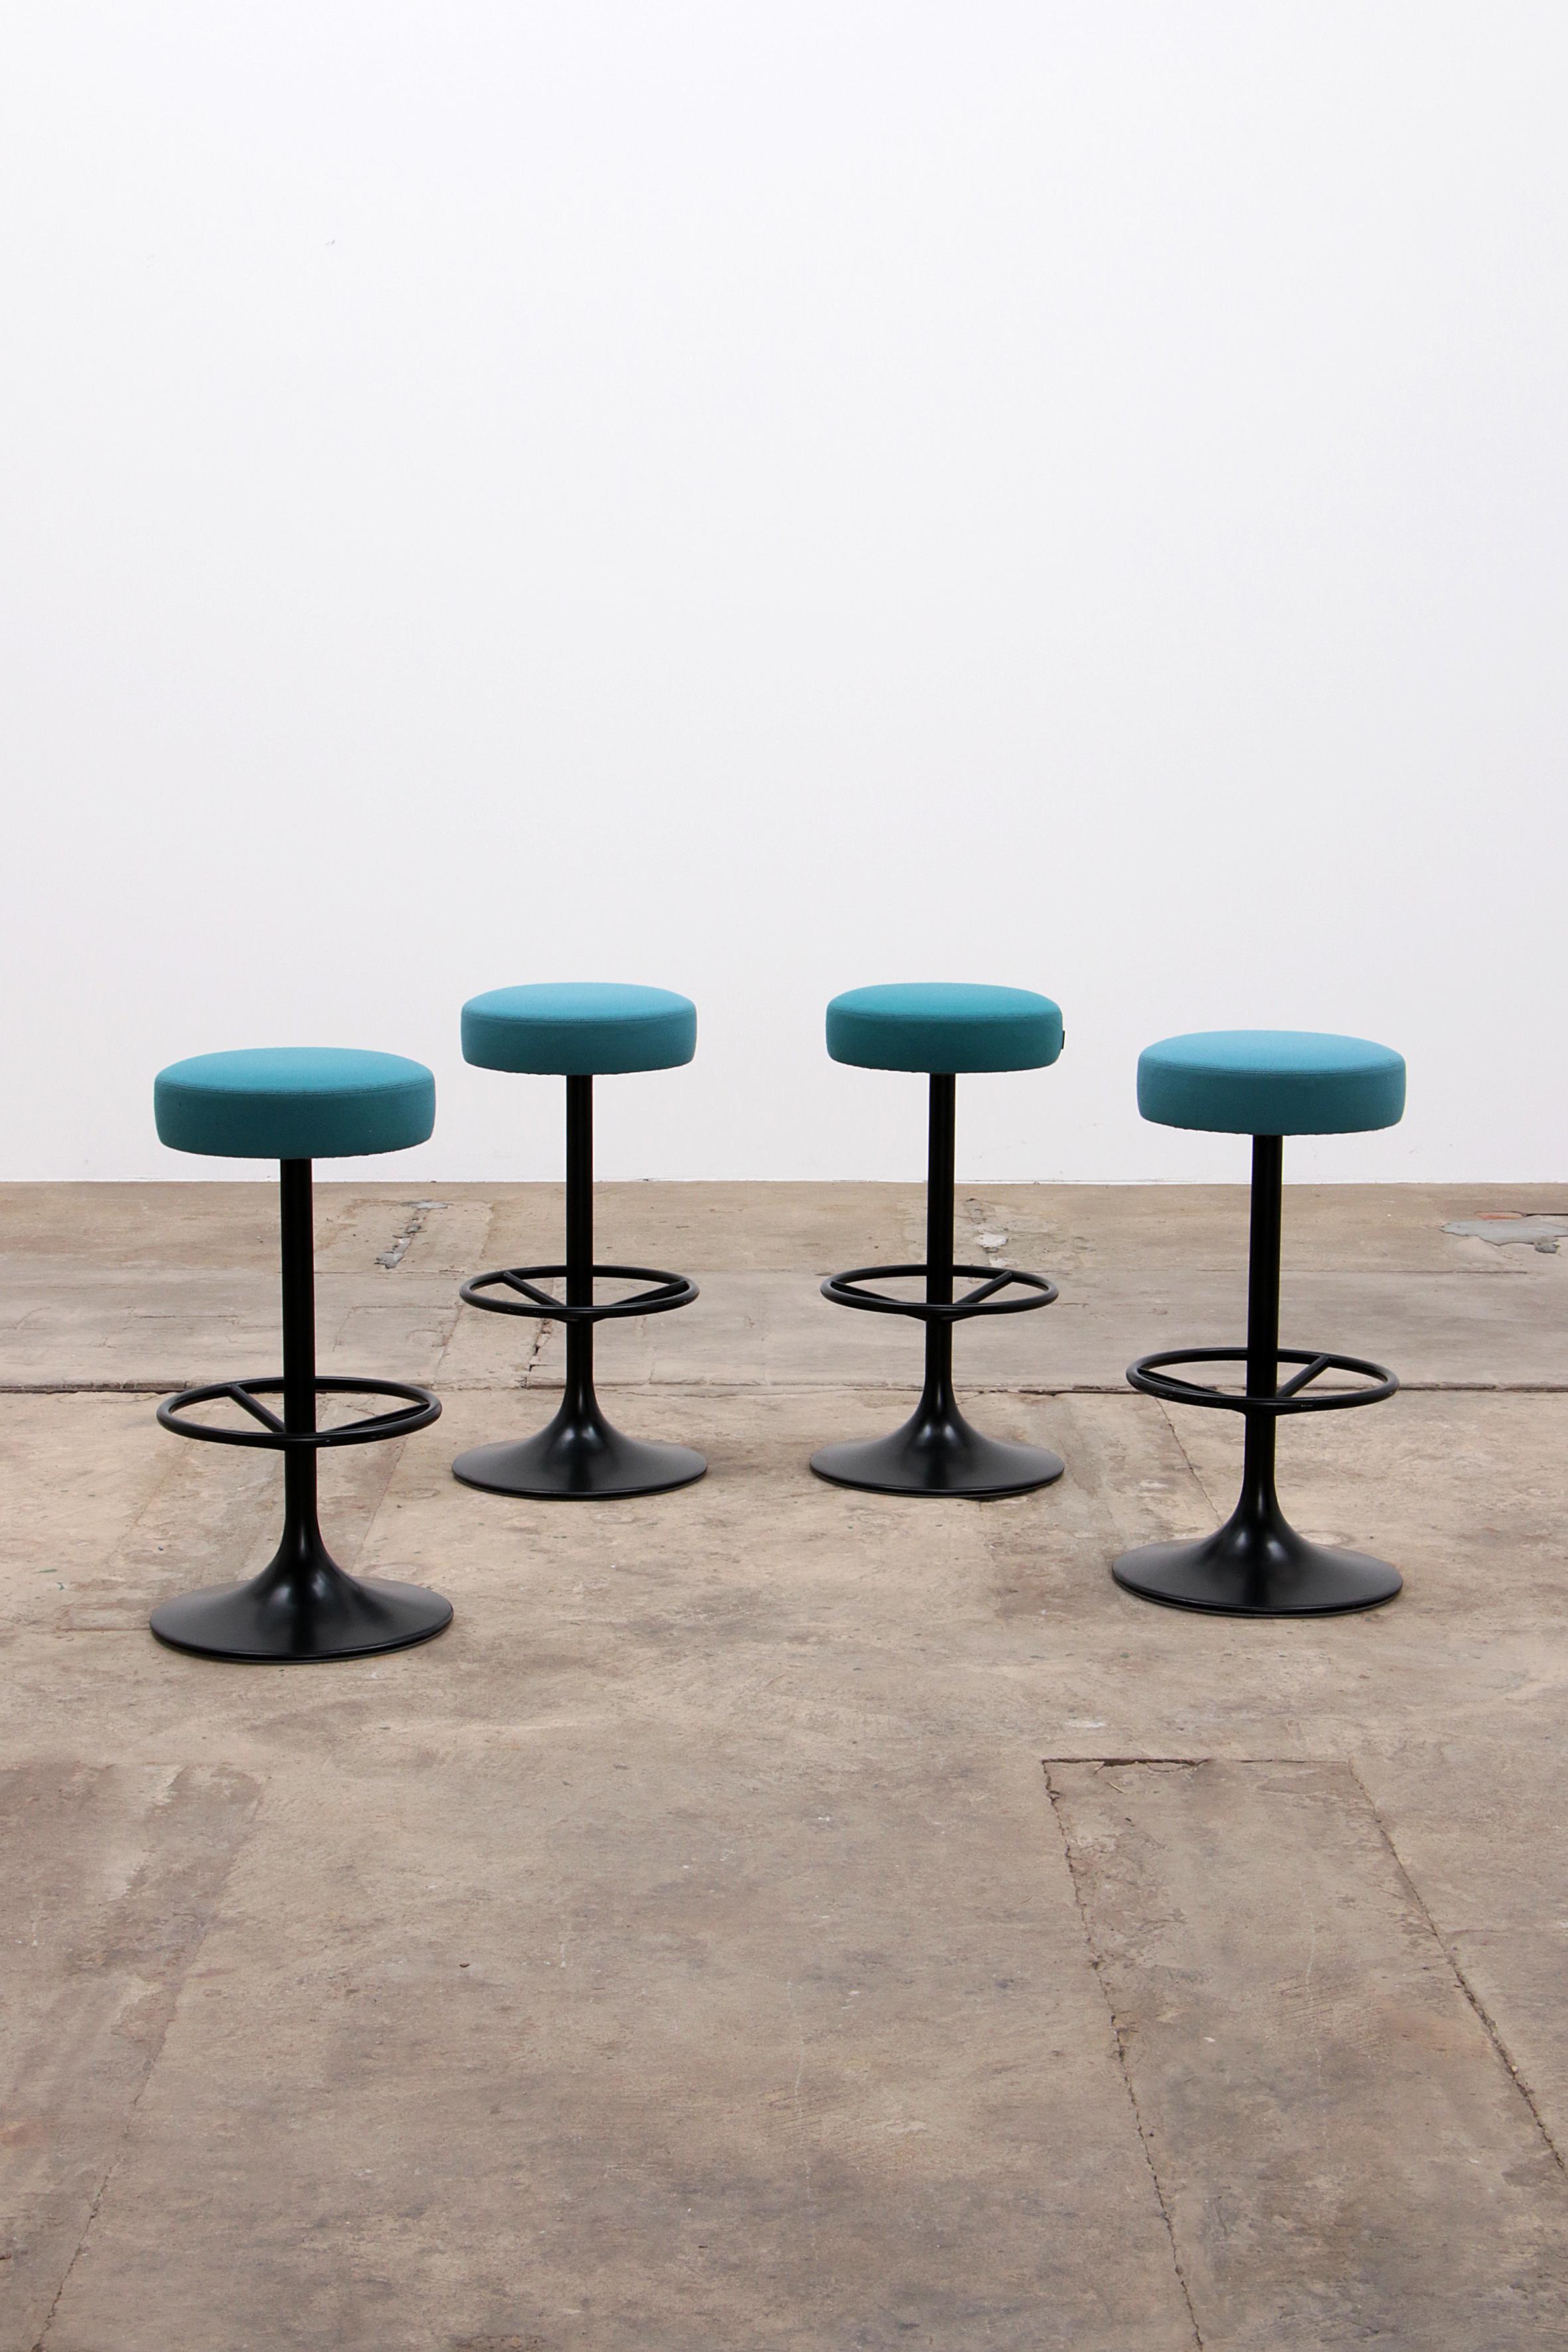 Mid century Vintage Bar Stools design by Borje Johanson, 1980 Sweden.

These four beautiful vintage Swedish bar stools will soon be at the bar in your home. A design by Borje Johanson. Produced by Johanson design. 

Design Period 1960s.

The trumpet